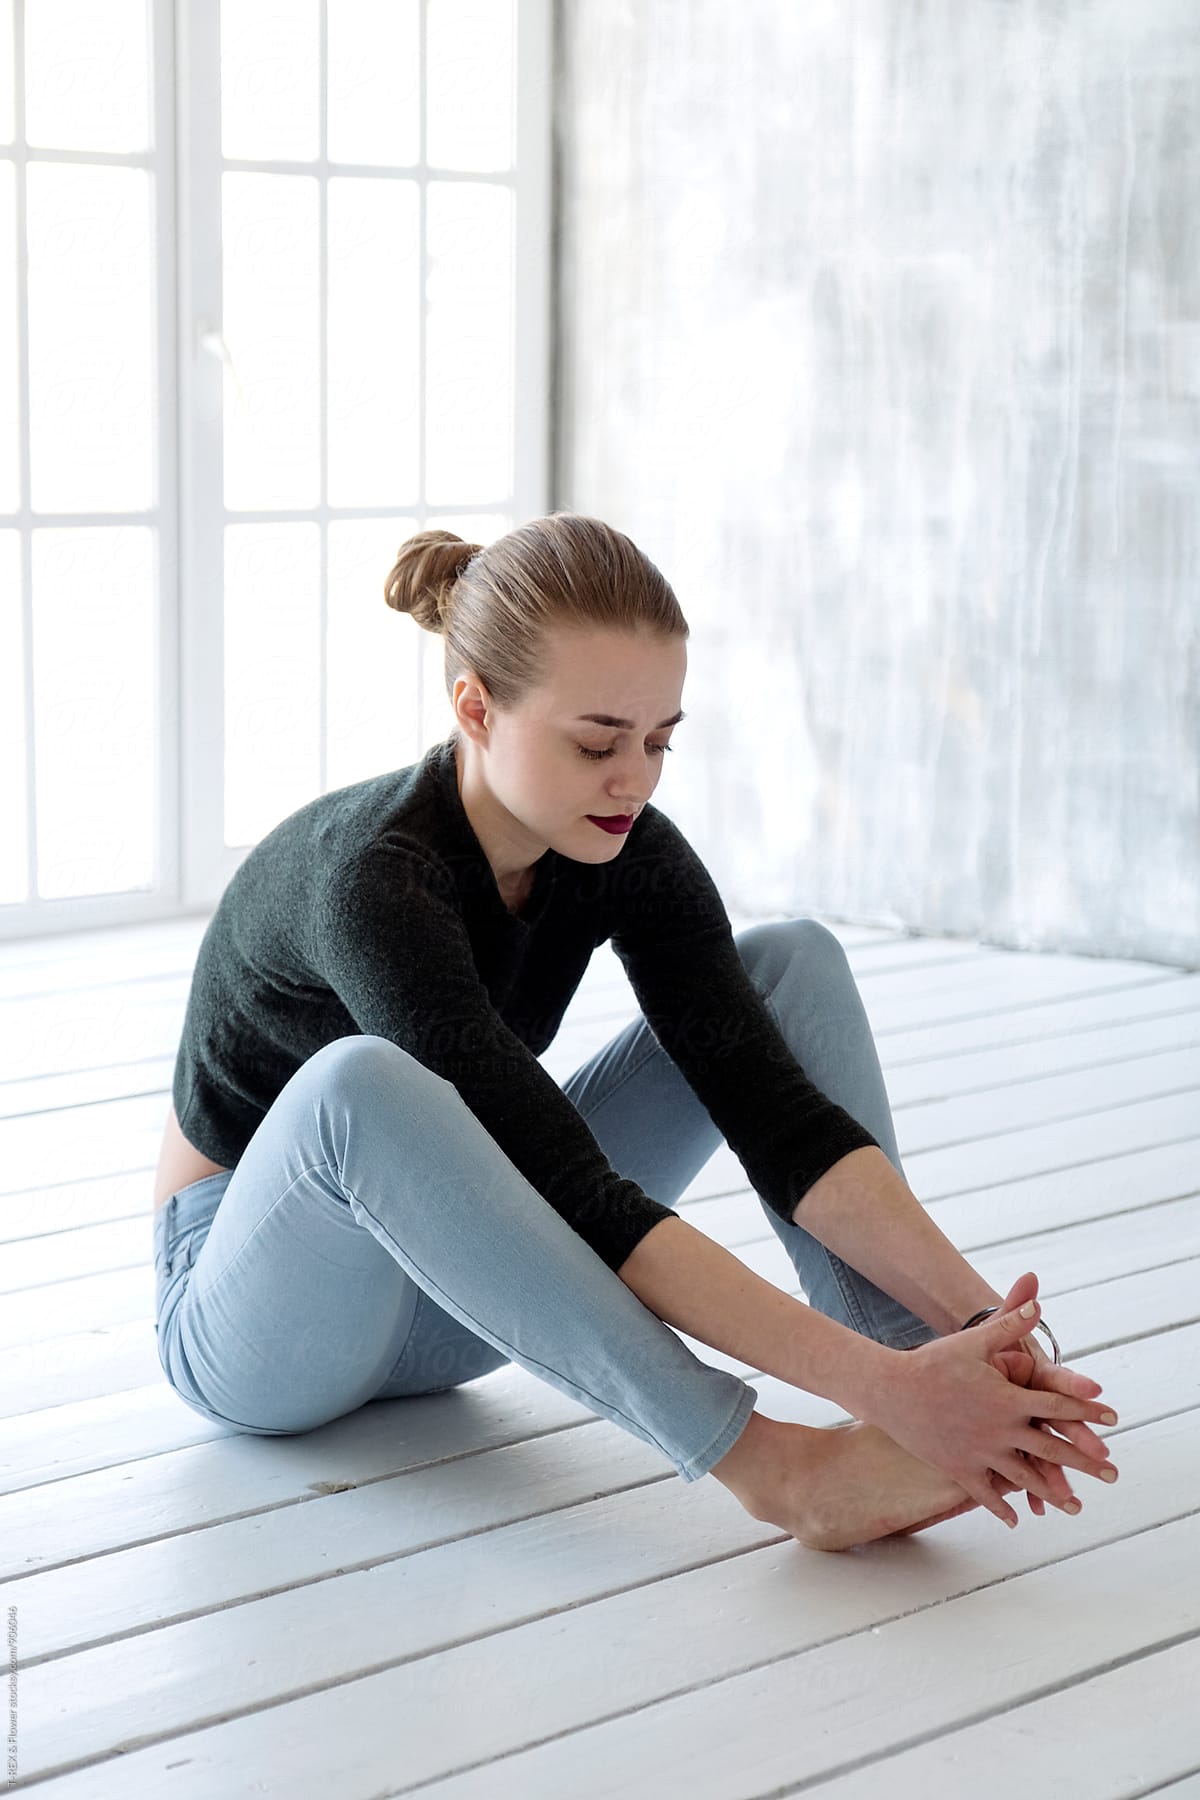 Woman Sitting On Wooden Floor While Touching Her Feet With Hands By Stocksy Contributor Danil